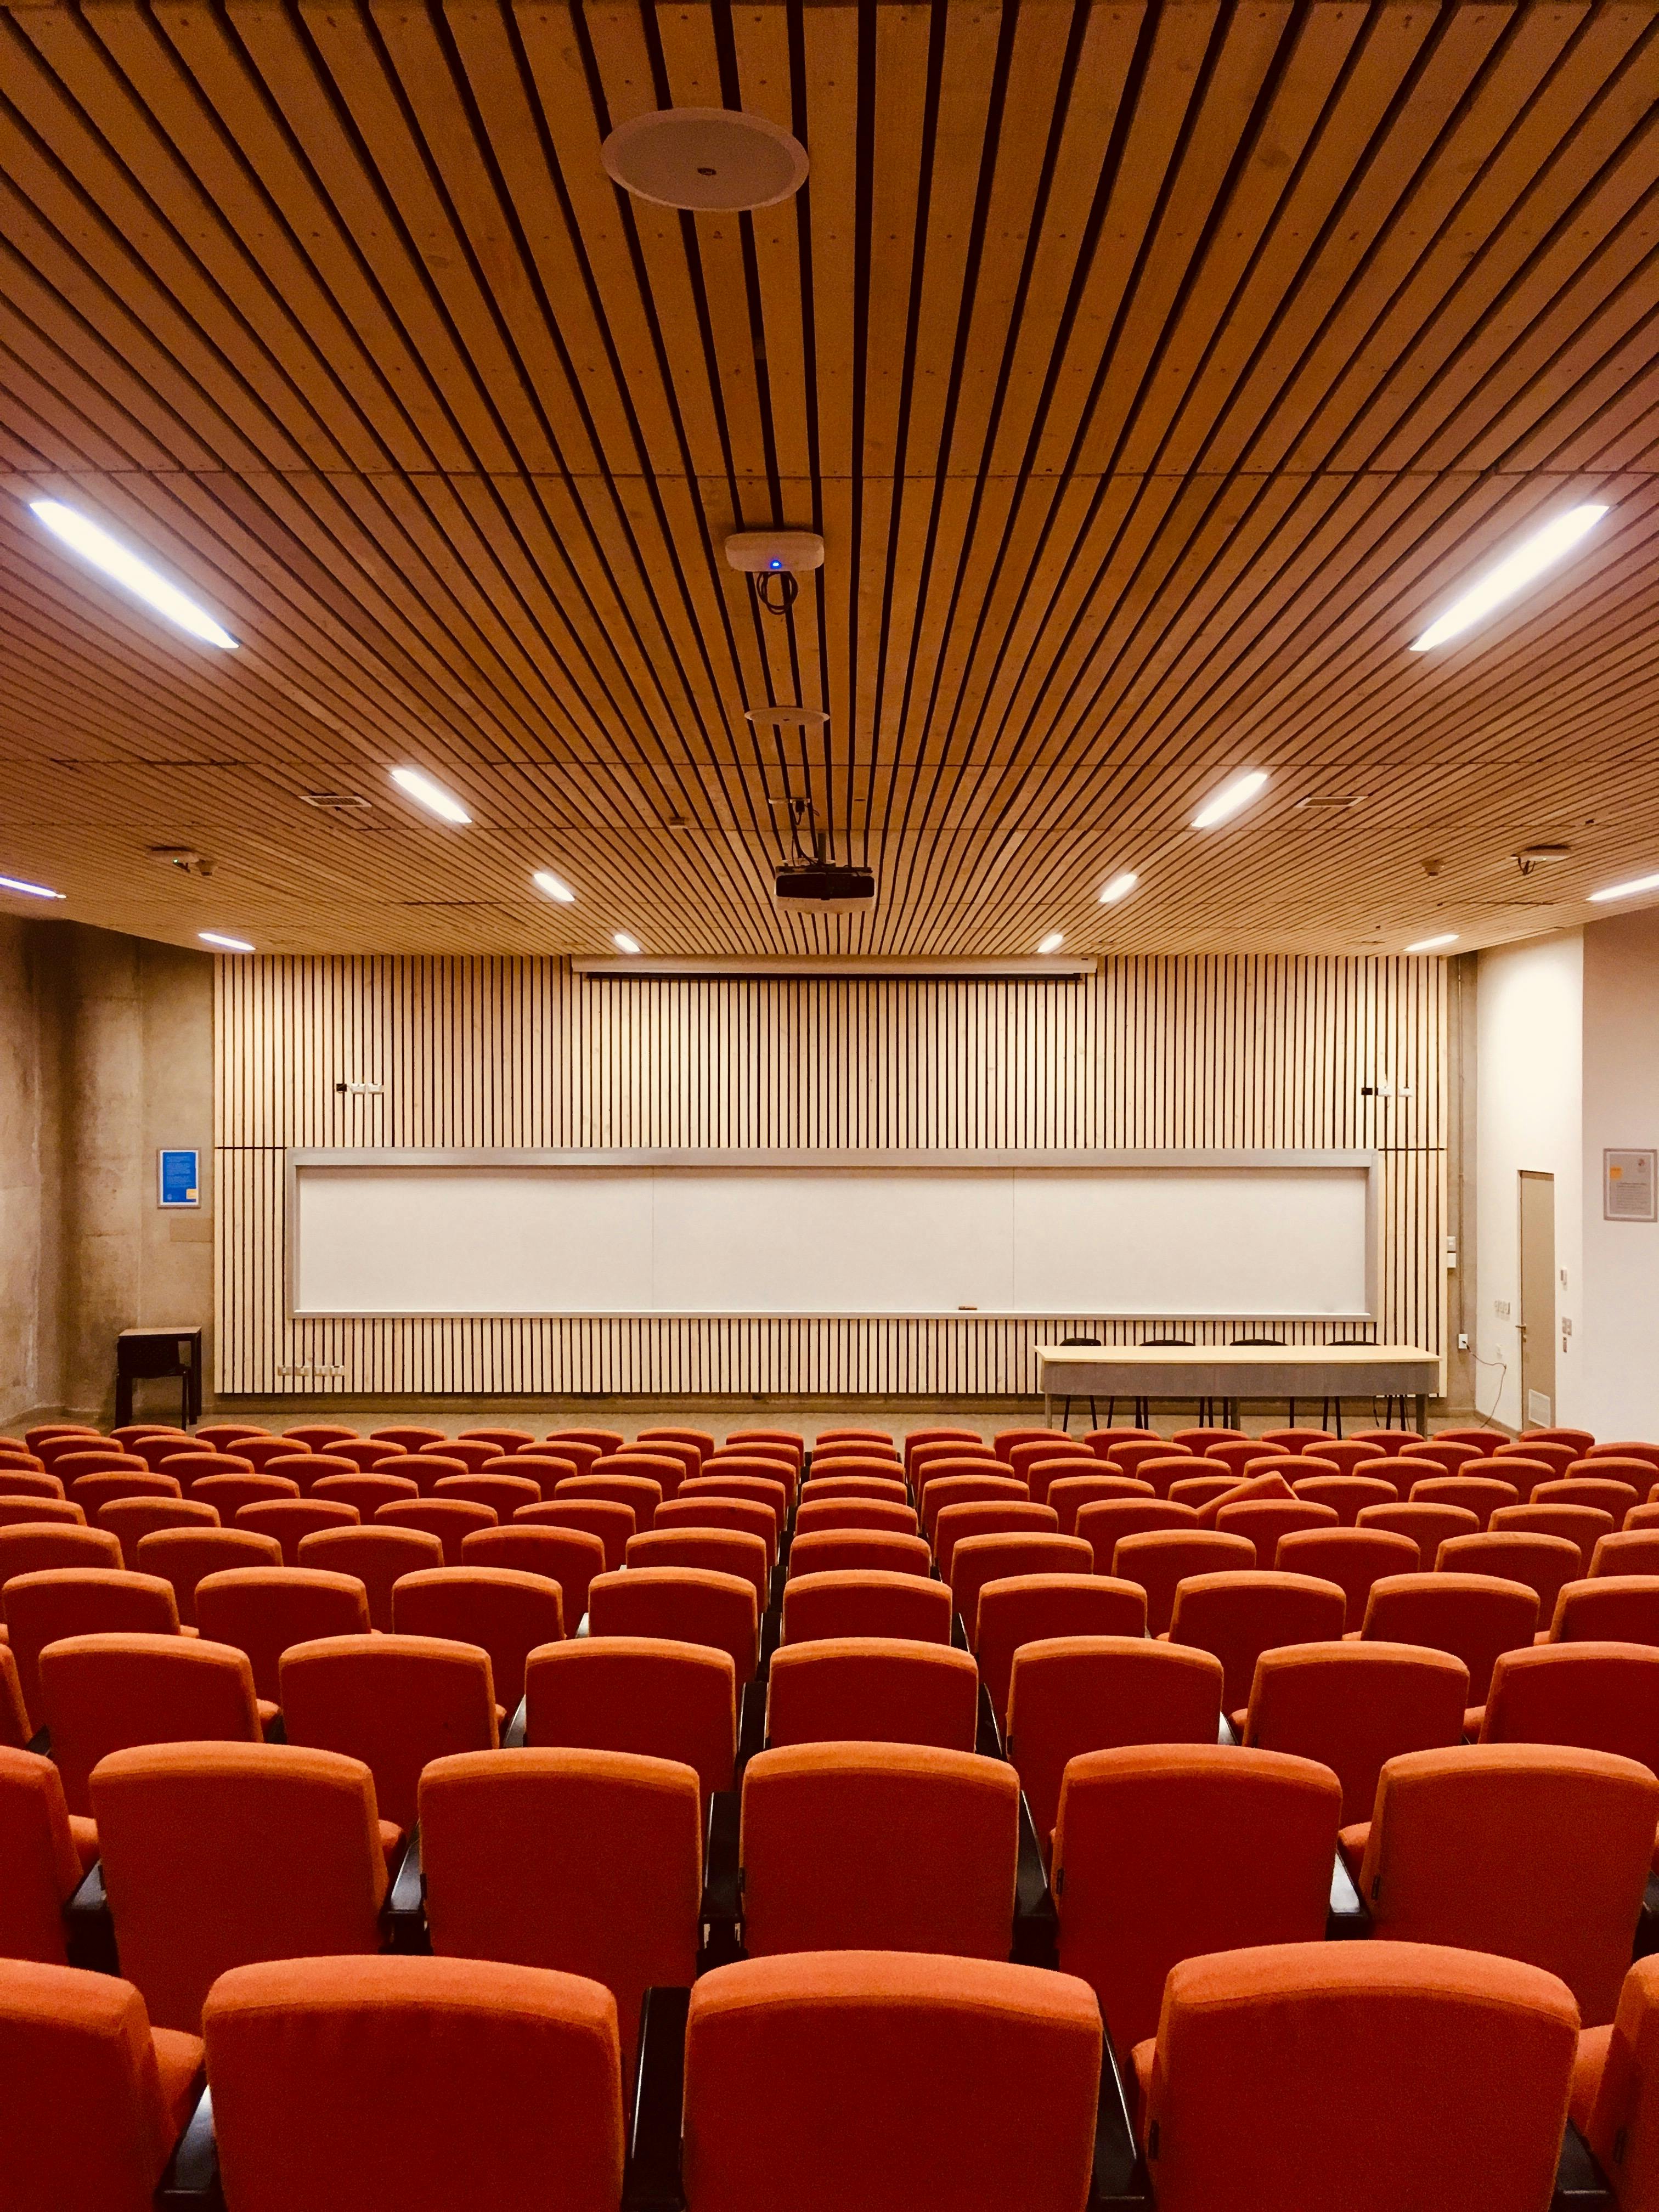 Bright, cozy and colorful image of an empty classroom. The bold, brick-colored chairs form an interesting texture in the bottom one third of the image, contrasting with the light tones of the wooden wall at the back of the room. Competing with the intentional symmetry of the image, one of the chairs at the bottom is slighty angled.